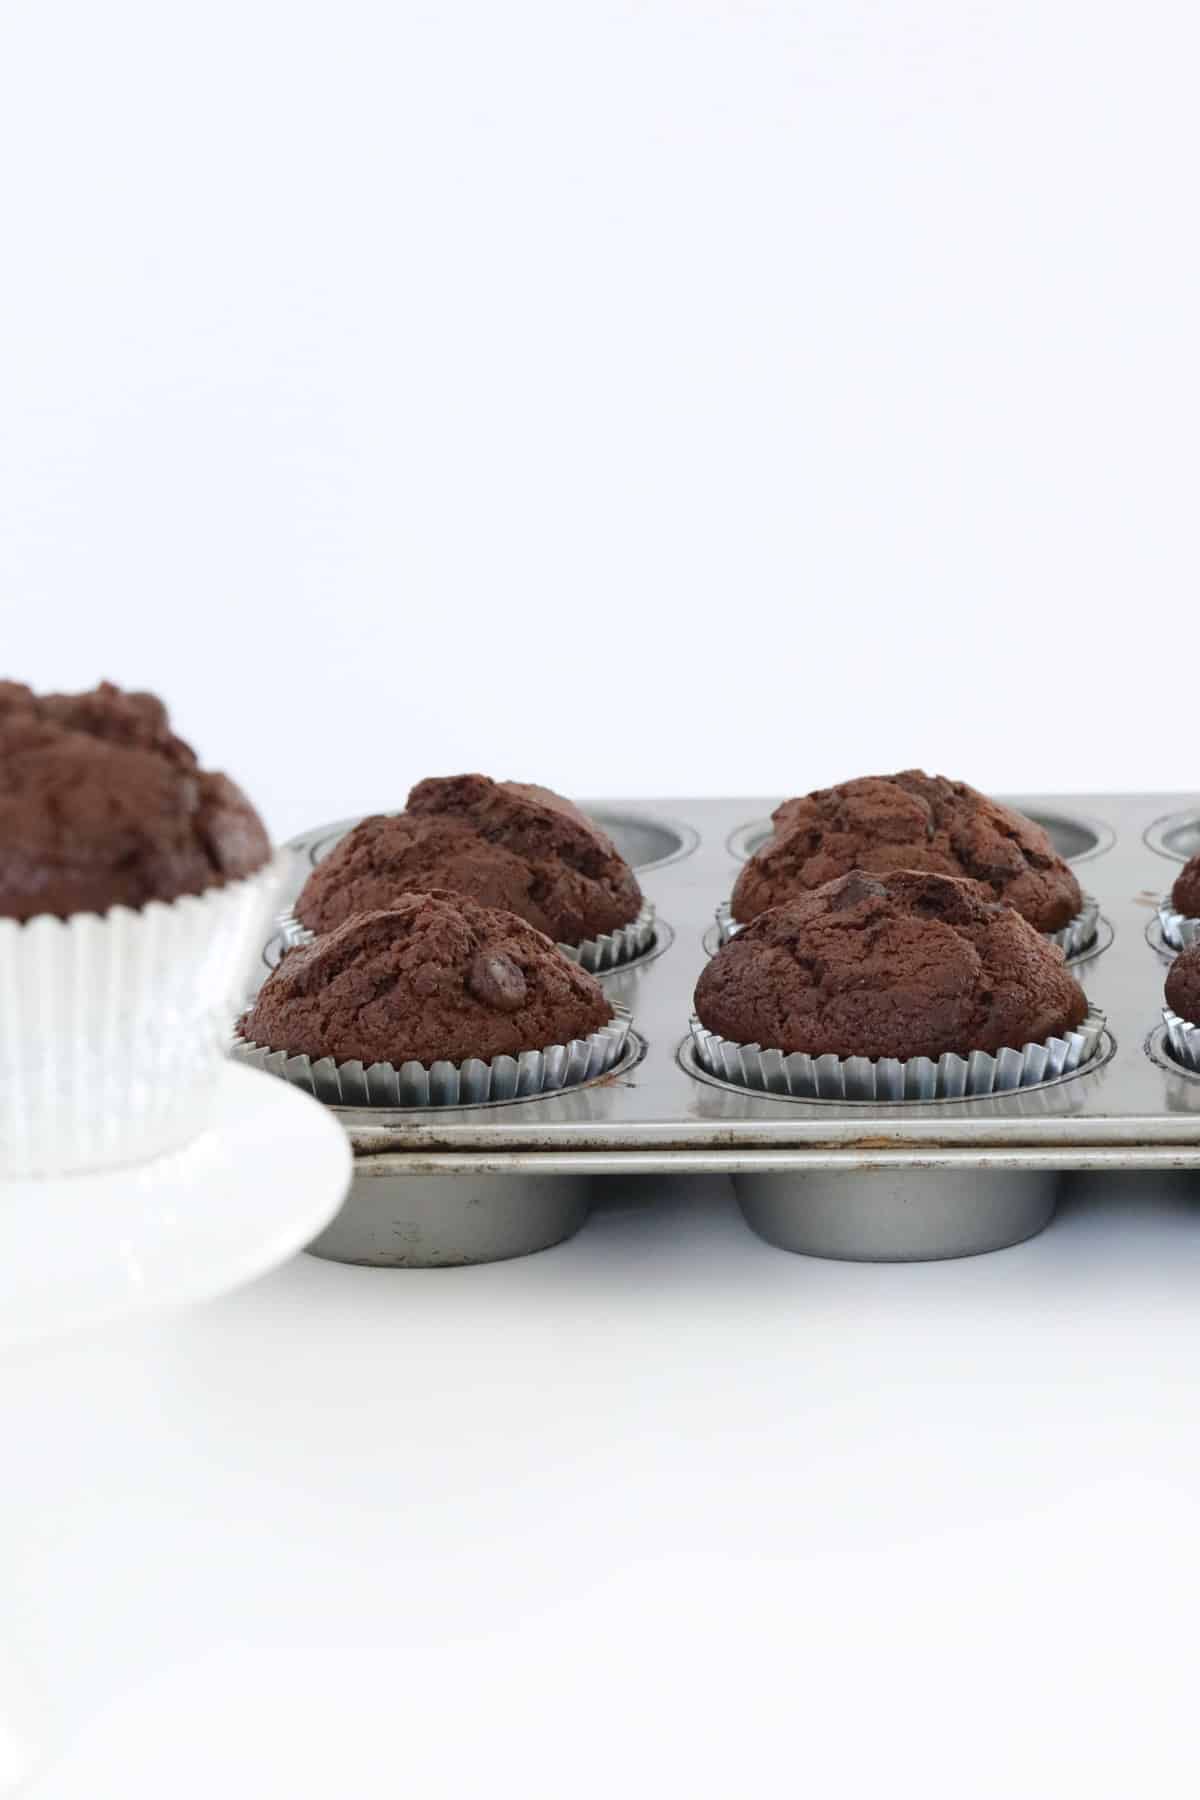 Chocolate chip muffins in silver muffin cases in a baking tray